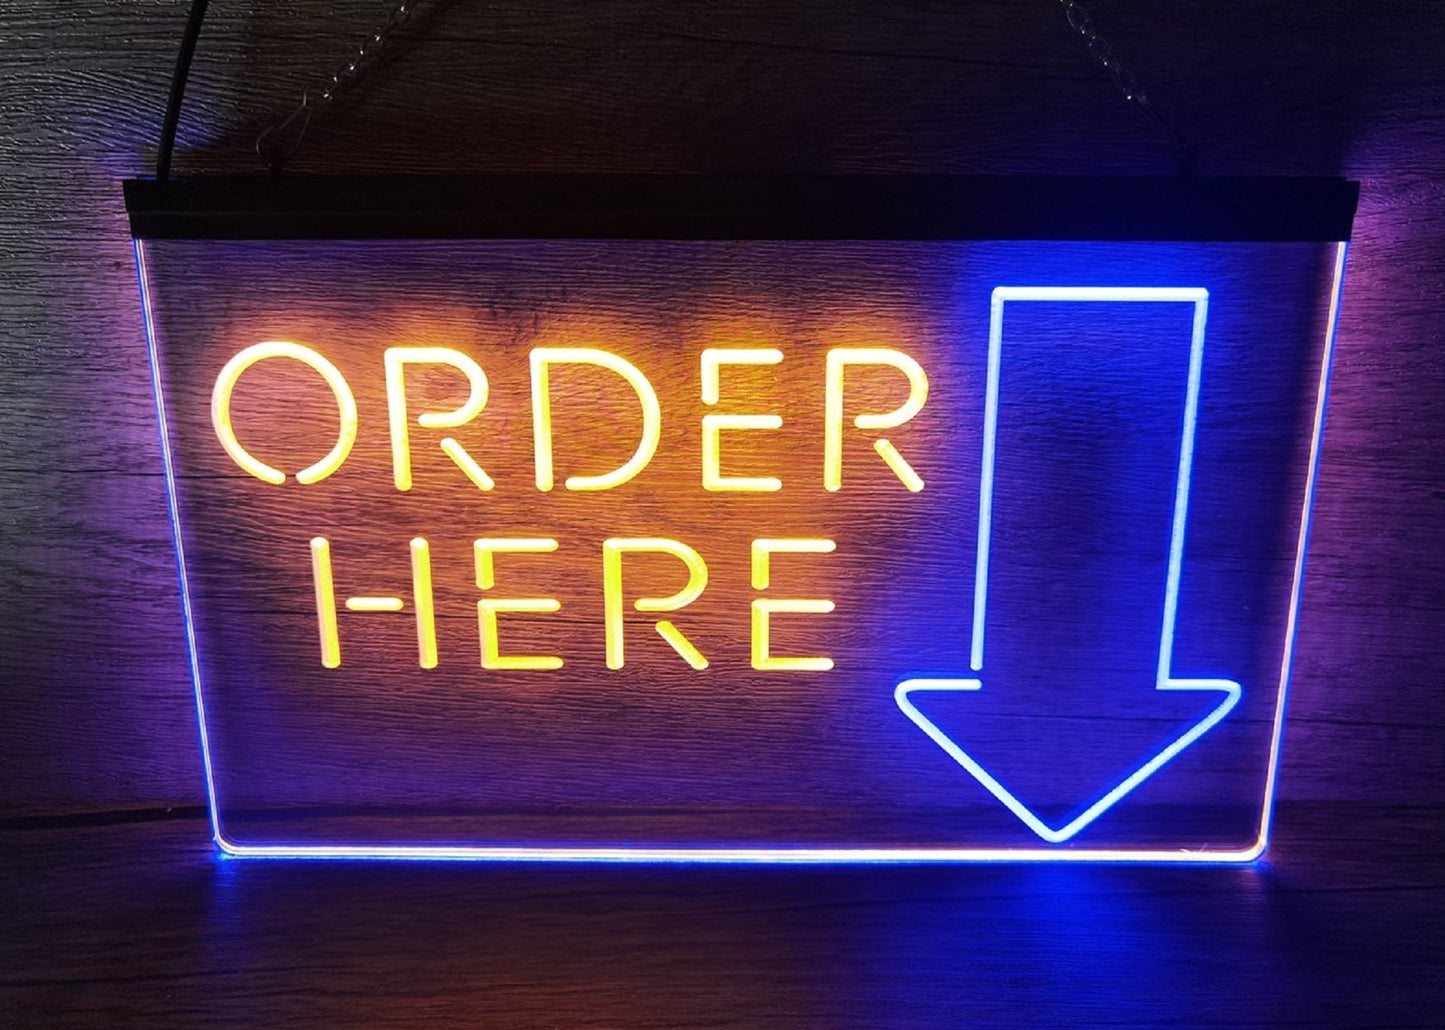 Neon Sign Dual Color Order Here Store Shop Wall Desktop Decor Free Shipping